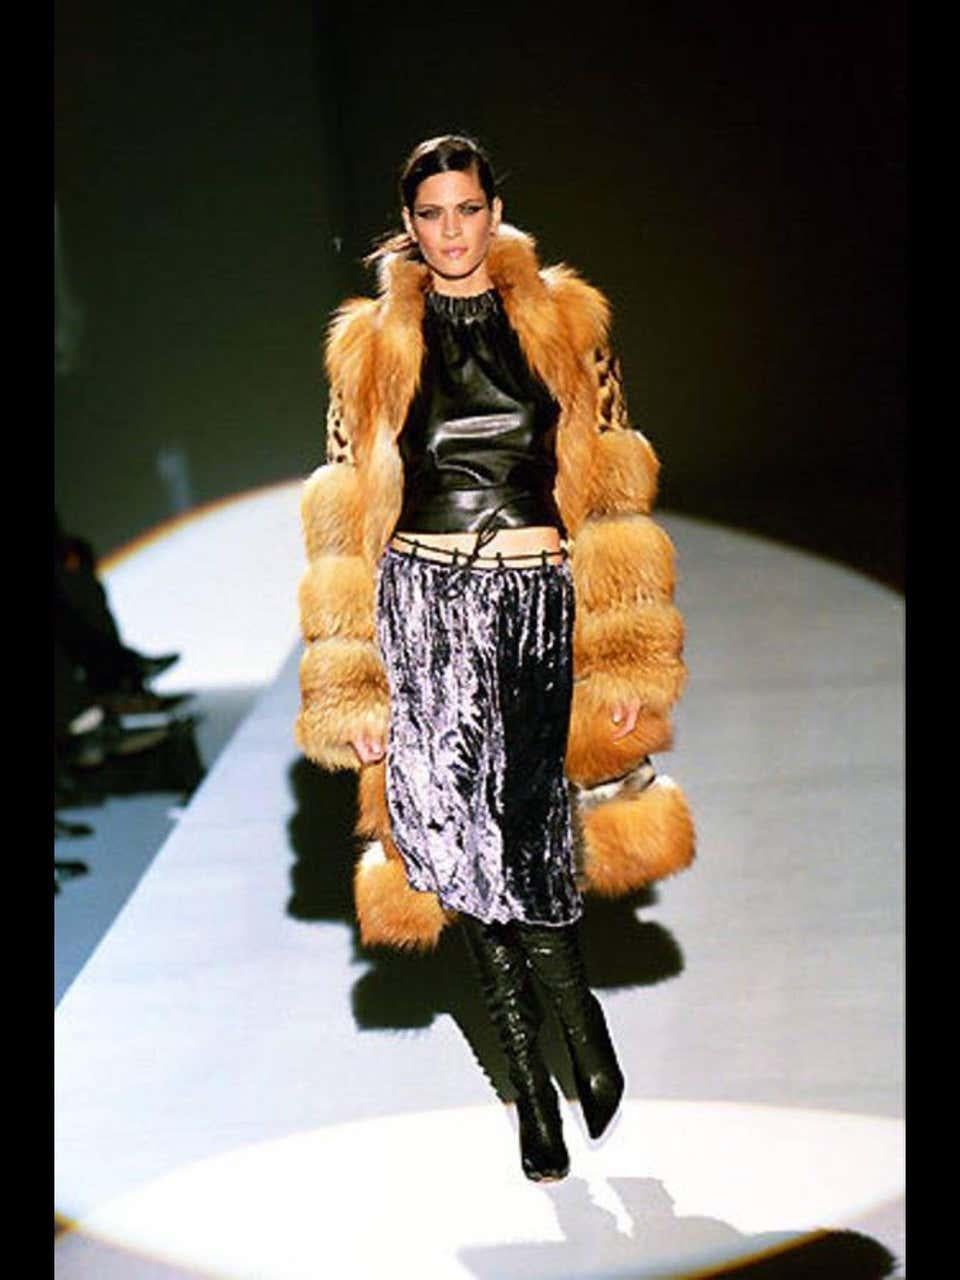 Museum Tom Ford for Gucci 2 in 1 Fur Coat Jacket
F/W 1999 Runway Collection
Coat can be converted to jacket in few seconds because of snap buttons along the waist - Brilliant Tom Ford Idea!!!
Fully lined in black leather, Inserts leather panels on